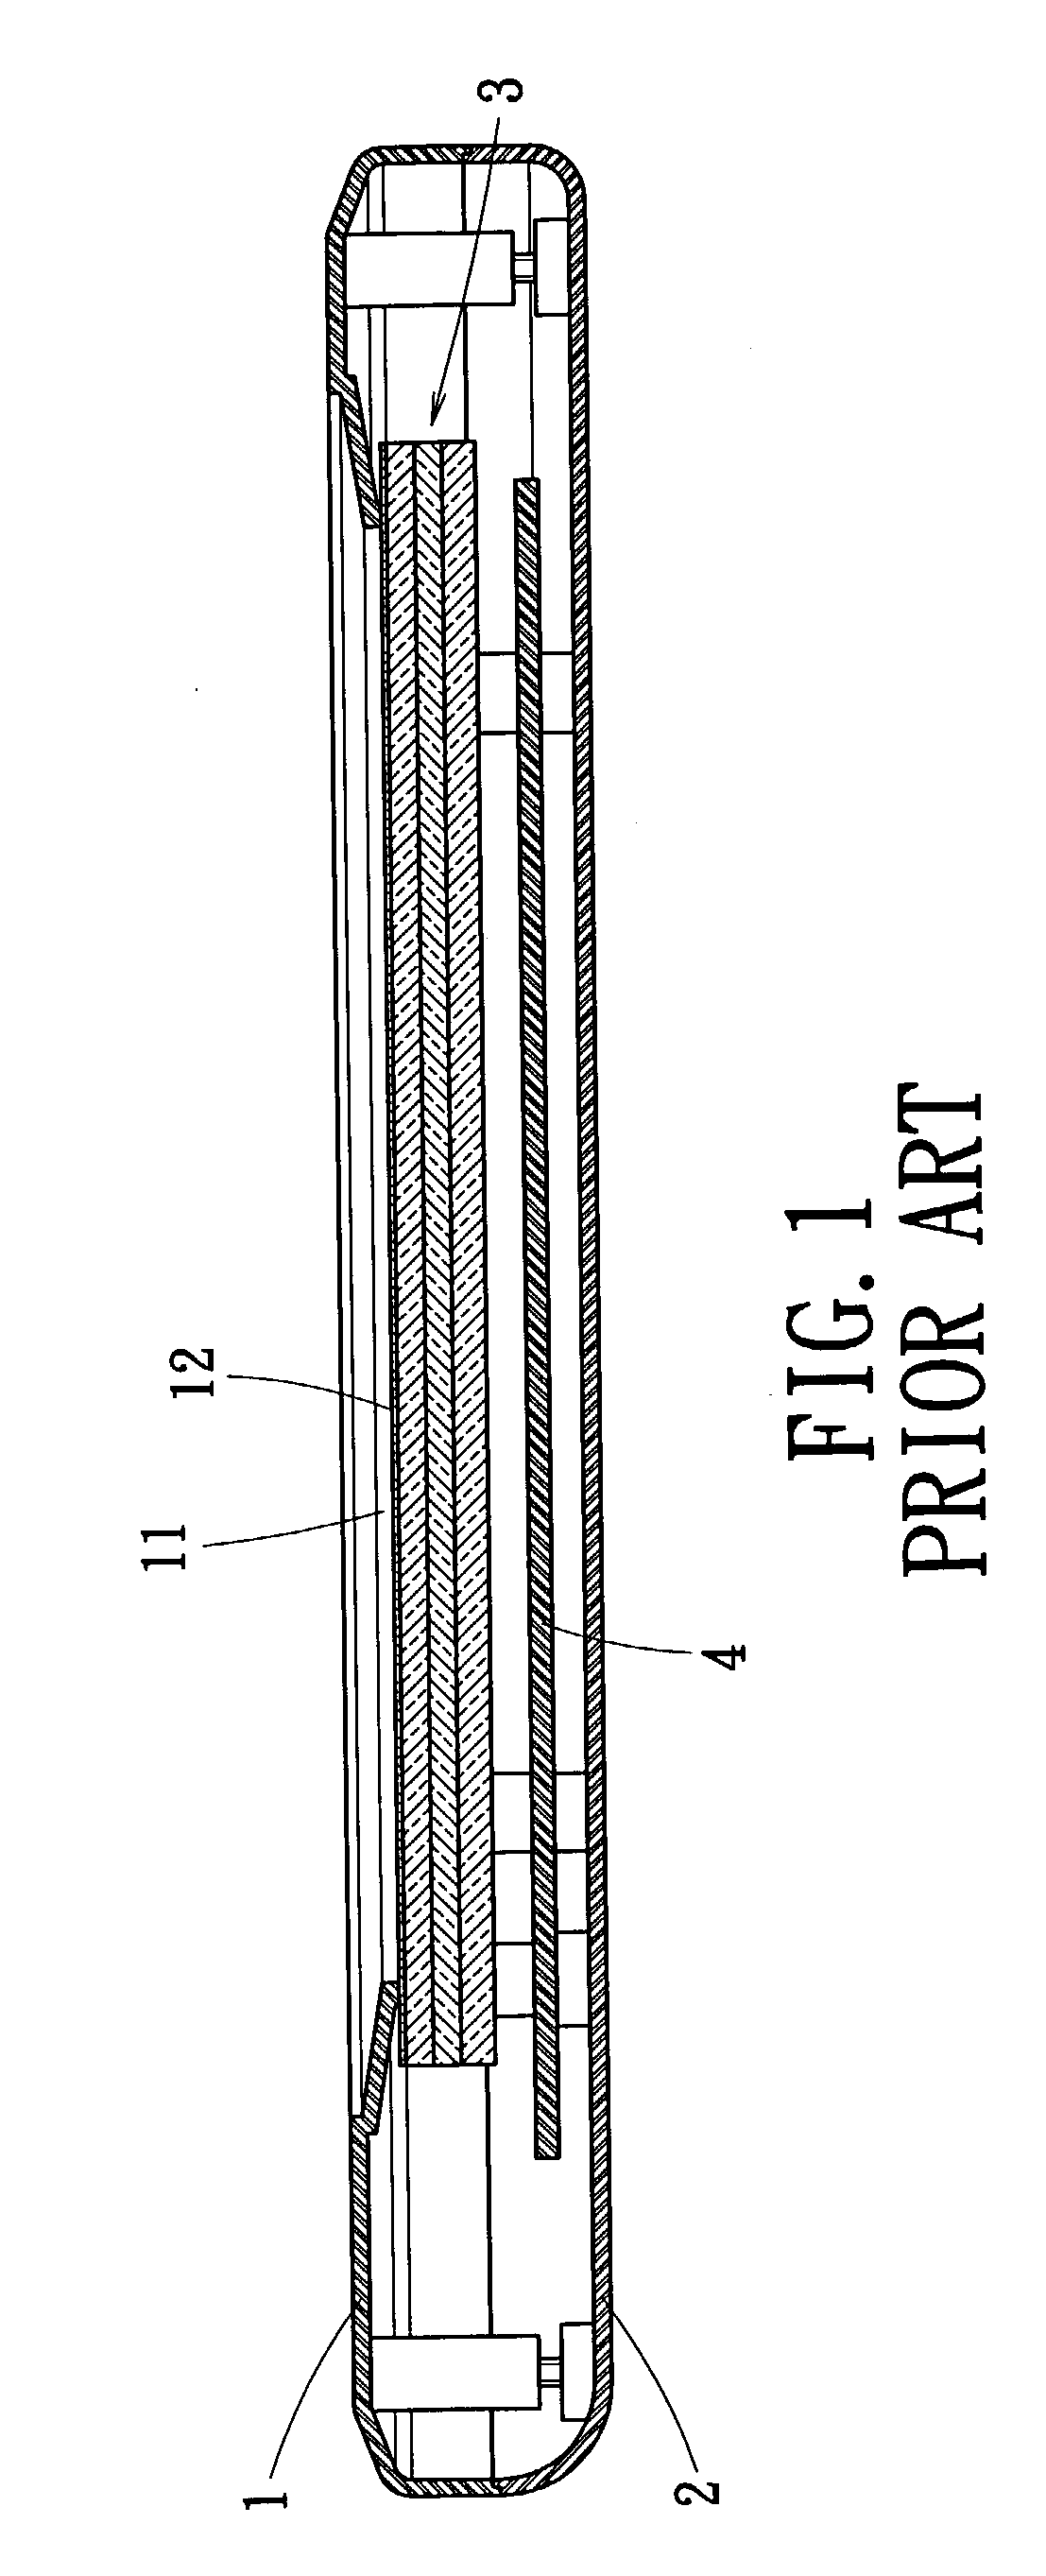 Touch panel display device